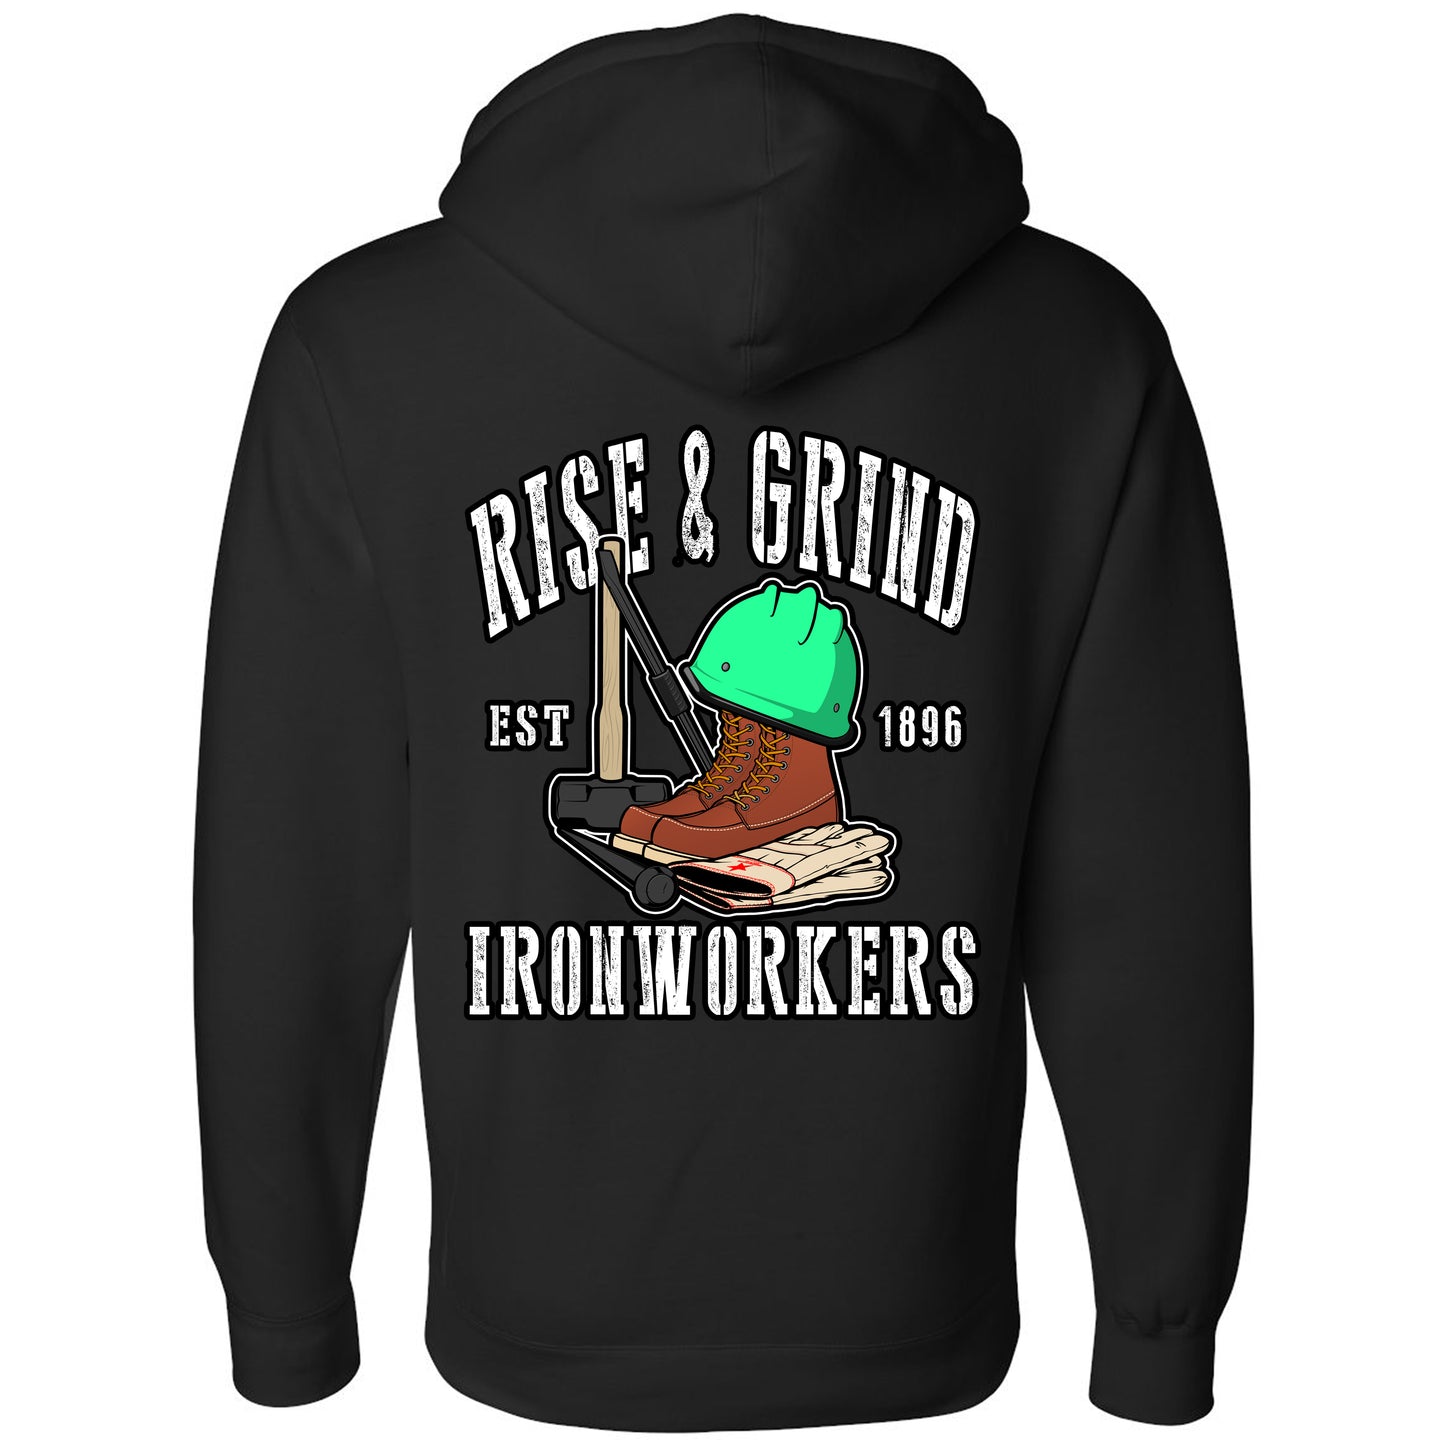 RISE AND GRIND PULLOVER HOODIE